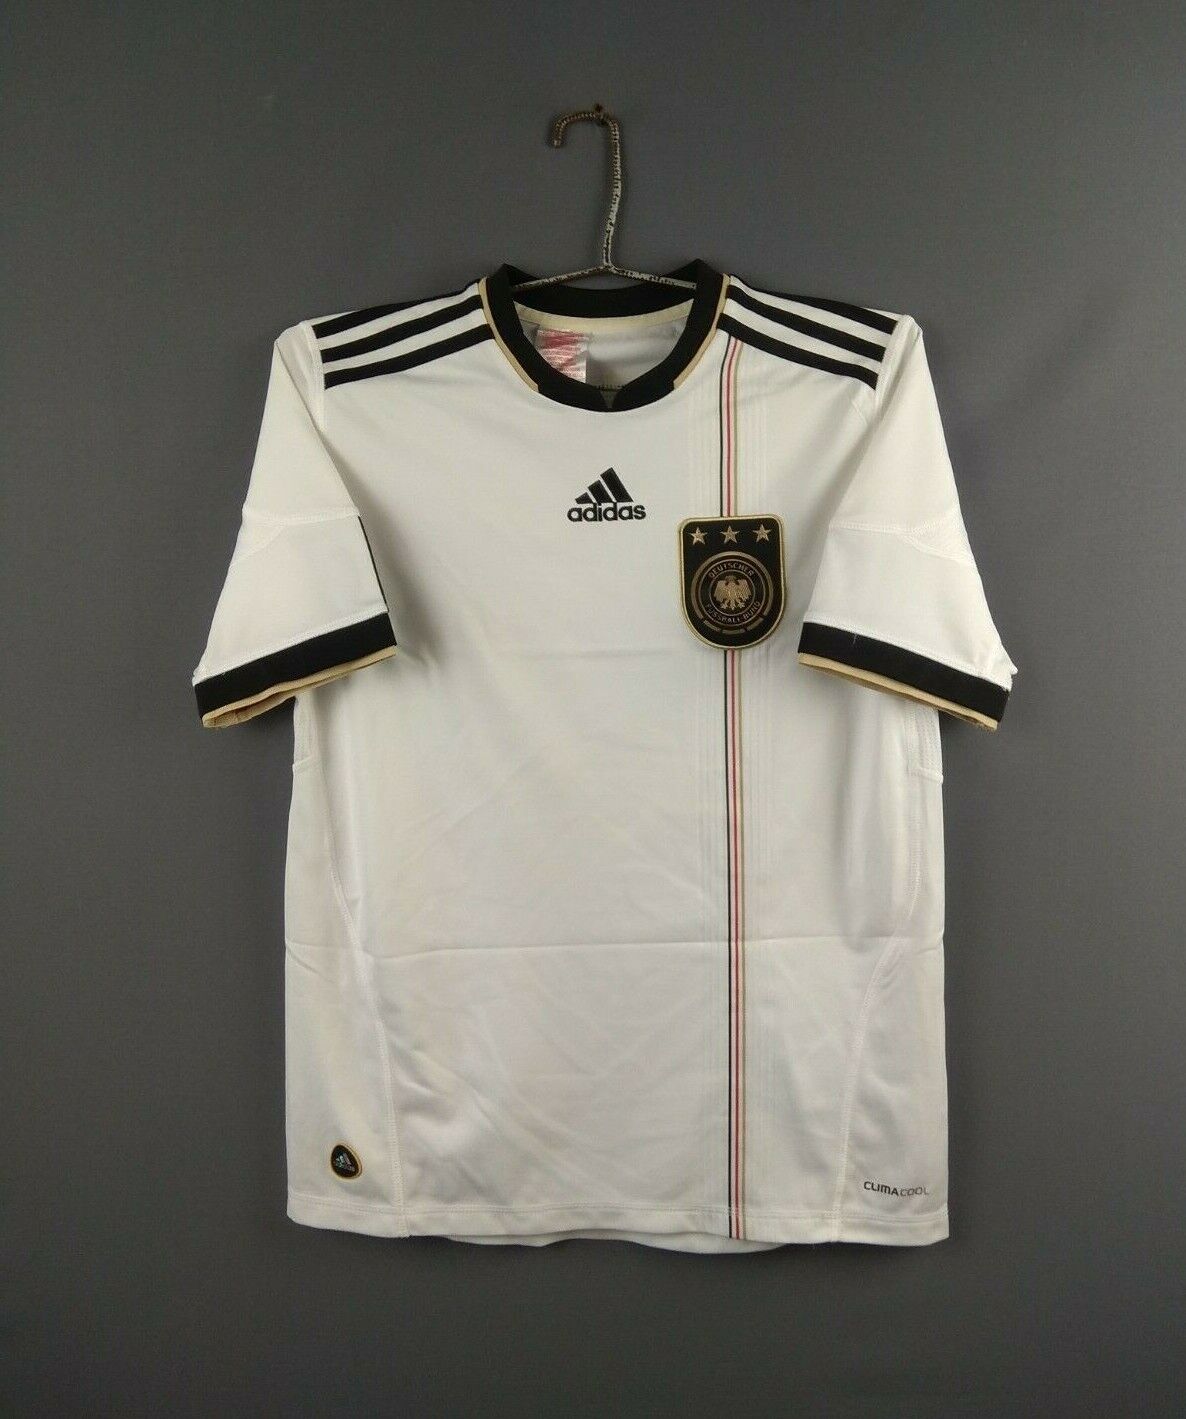 Germany Soccer Jersey Youth Large 2010 2012 Shirt P41474 adidas ...